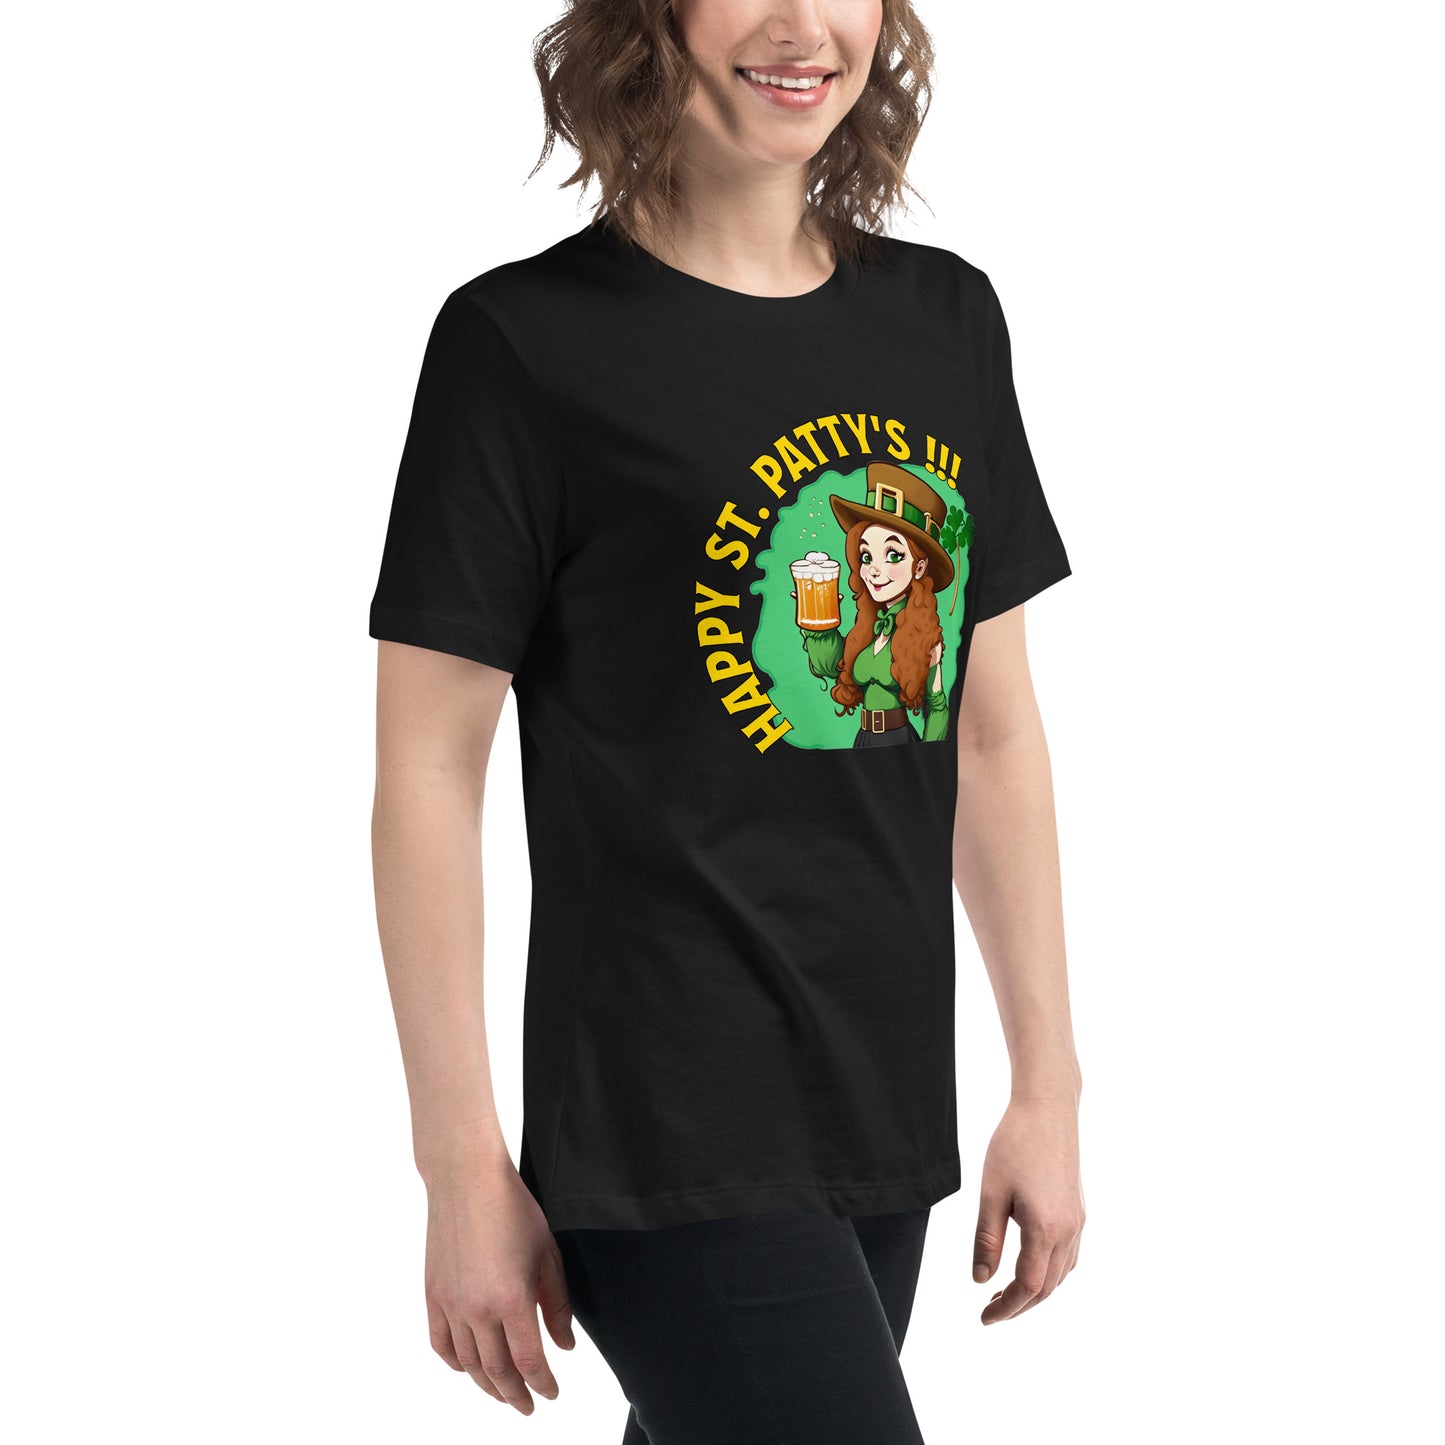 Happy St. Patty's - Women's Relaxed T-Shirt